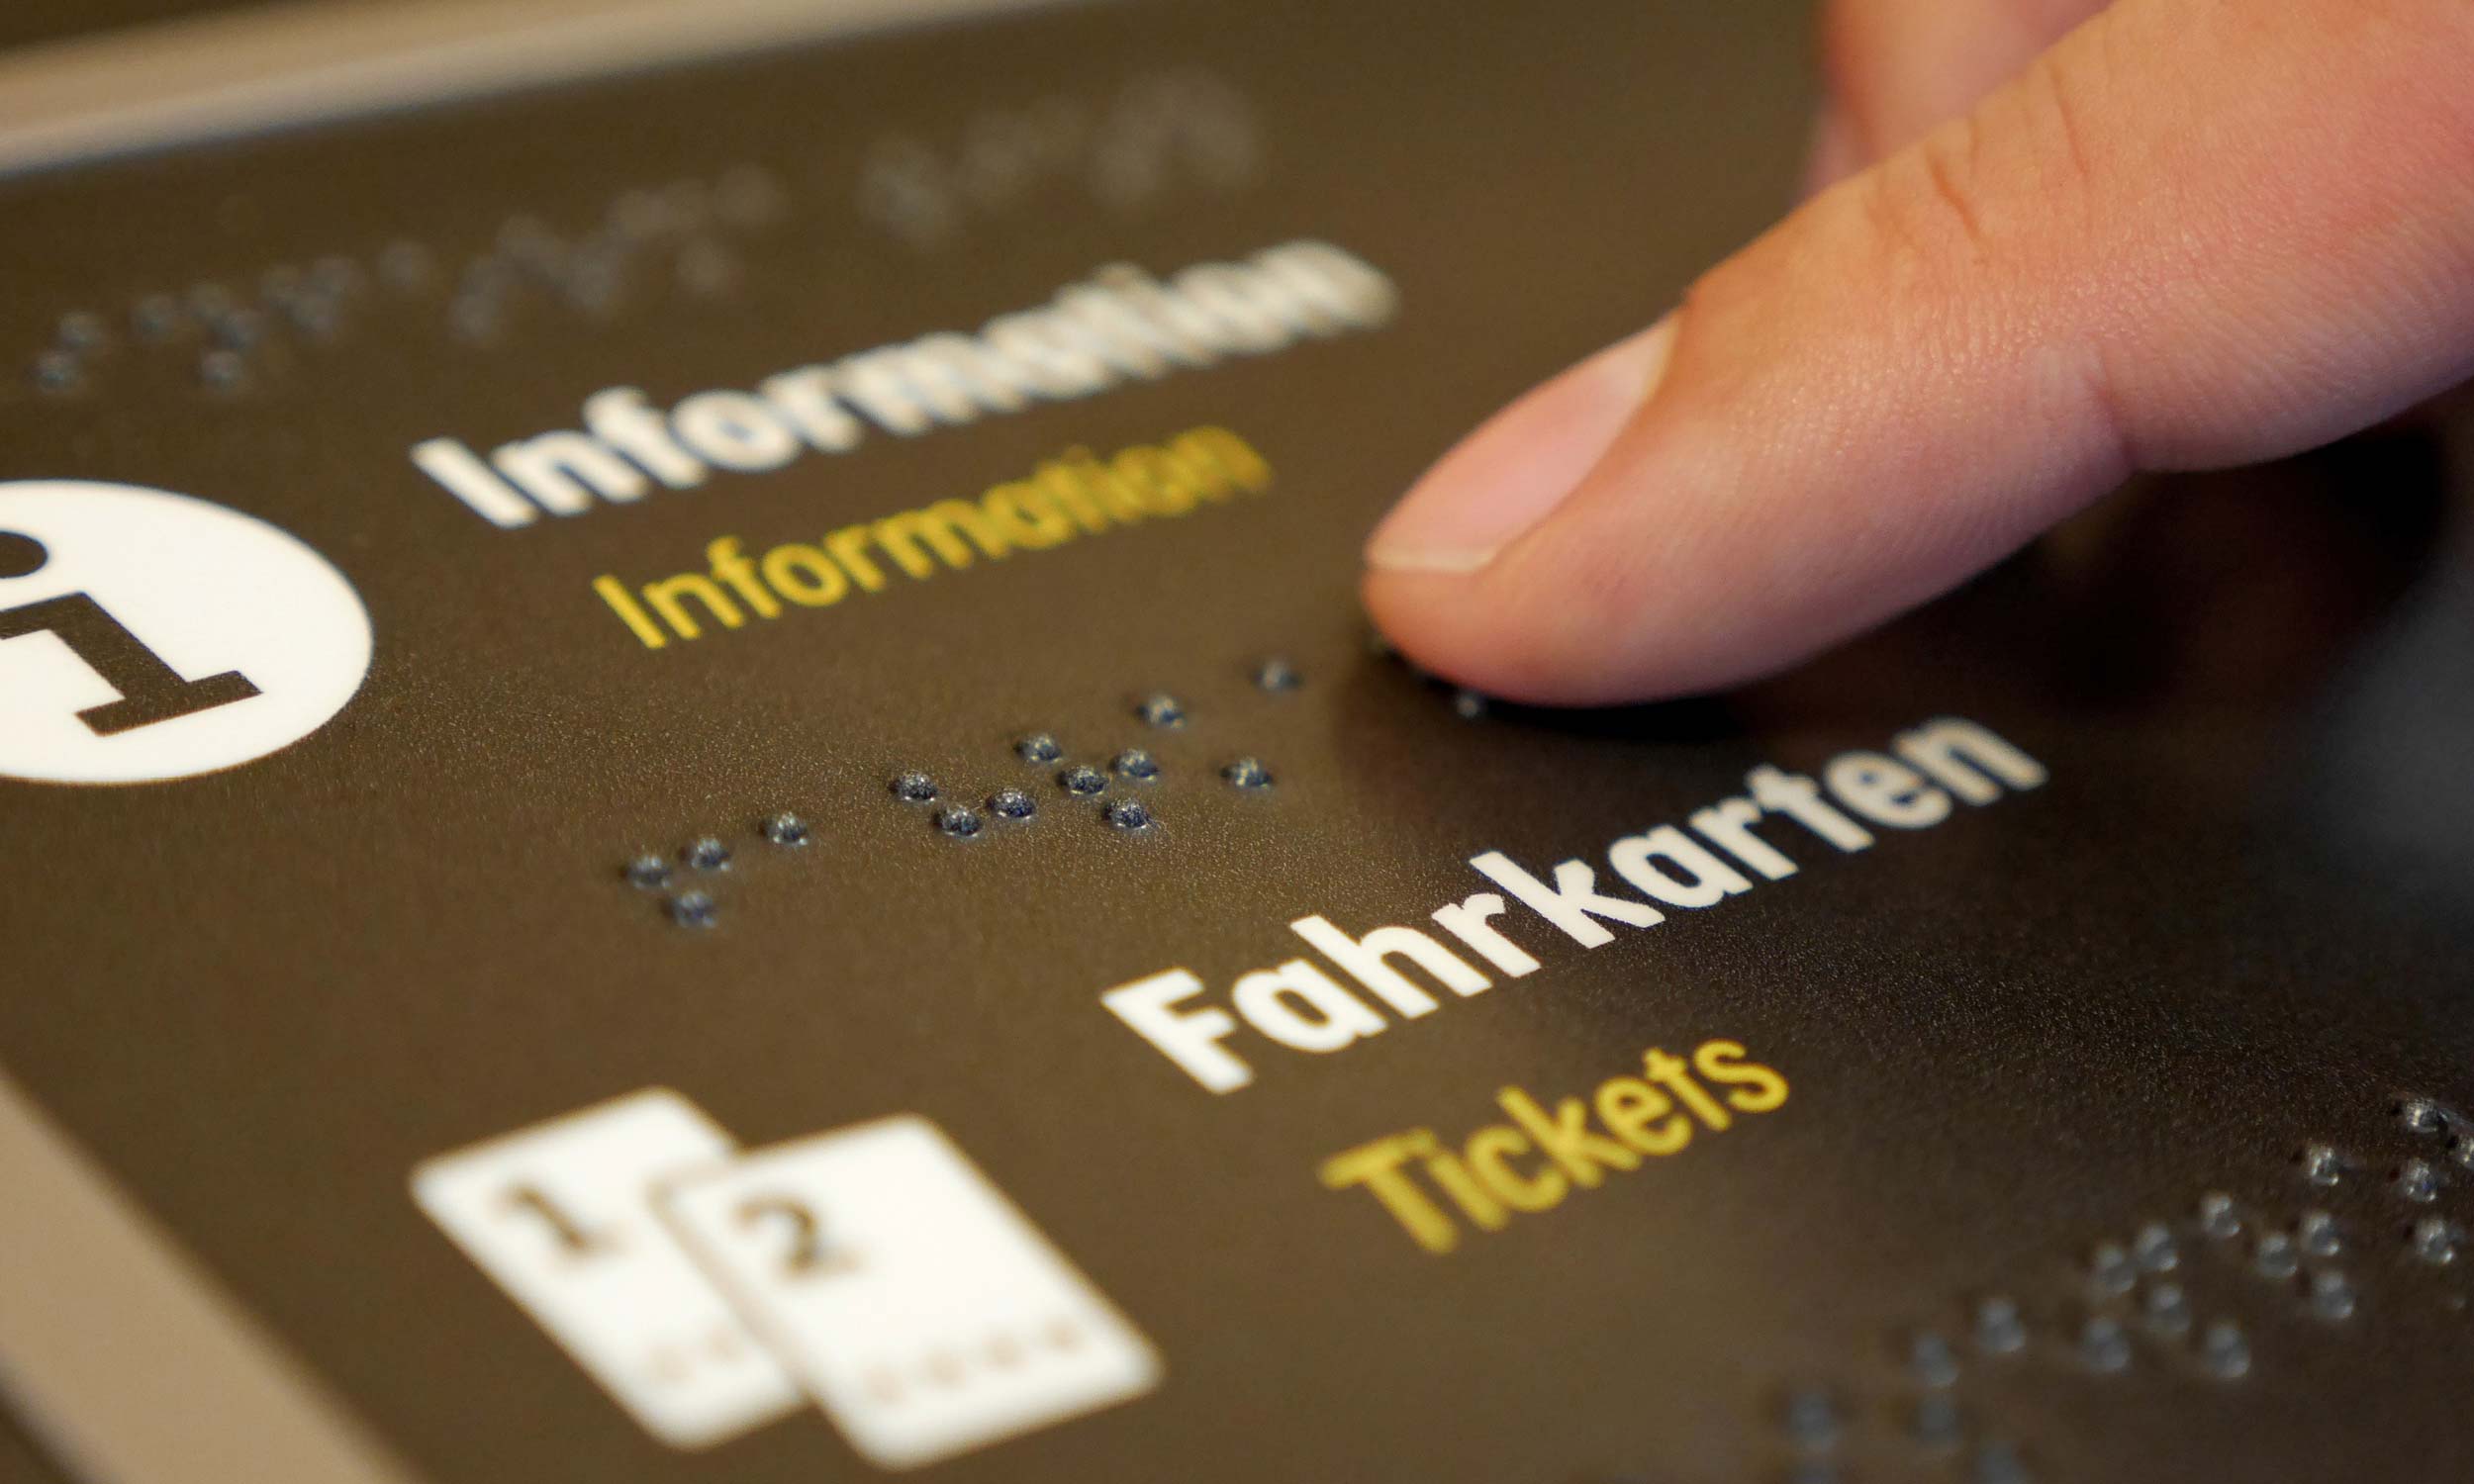 Detail photo of a horizontally arranged information sign with Braille